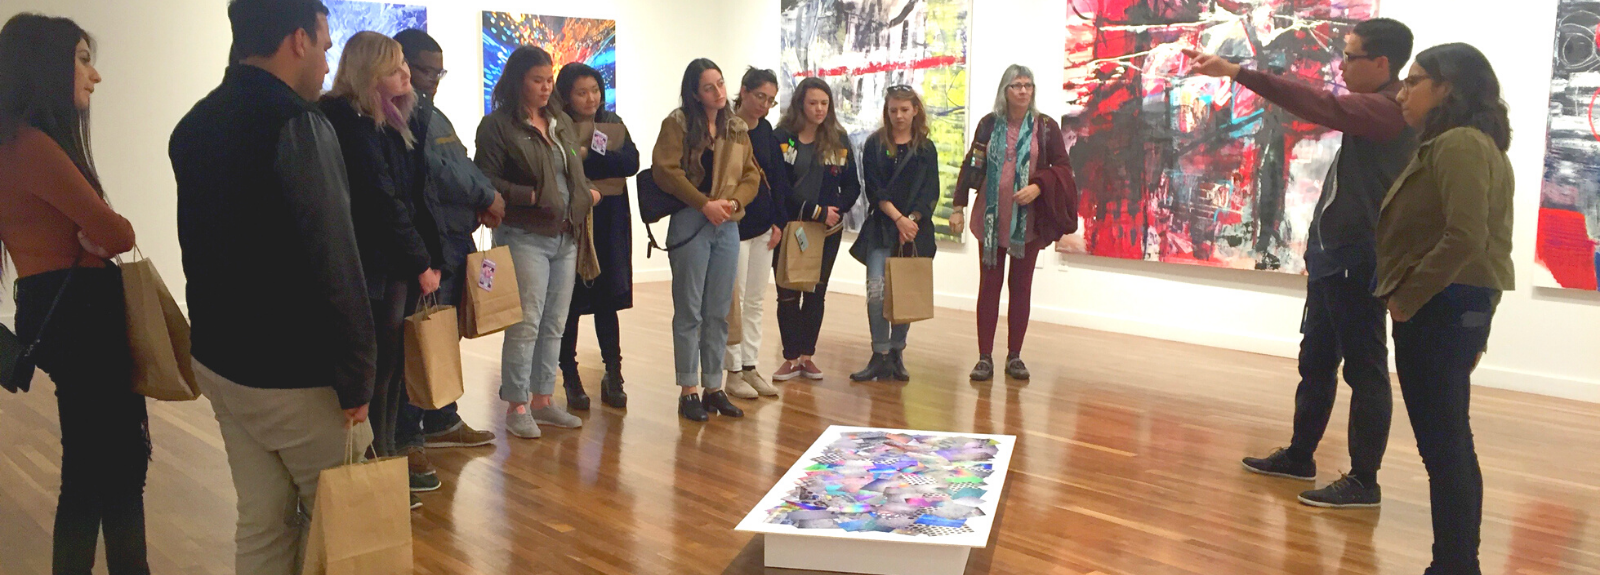 gallery tour at UCR ARTS